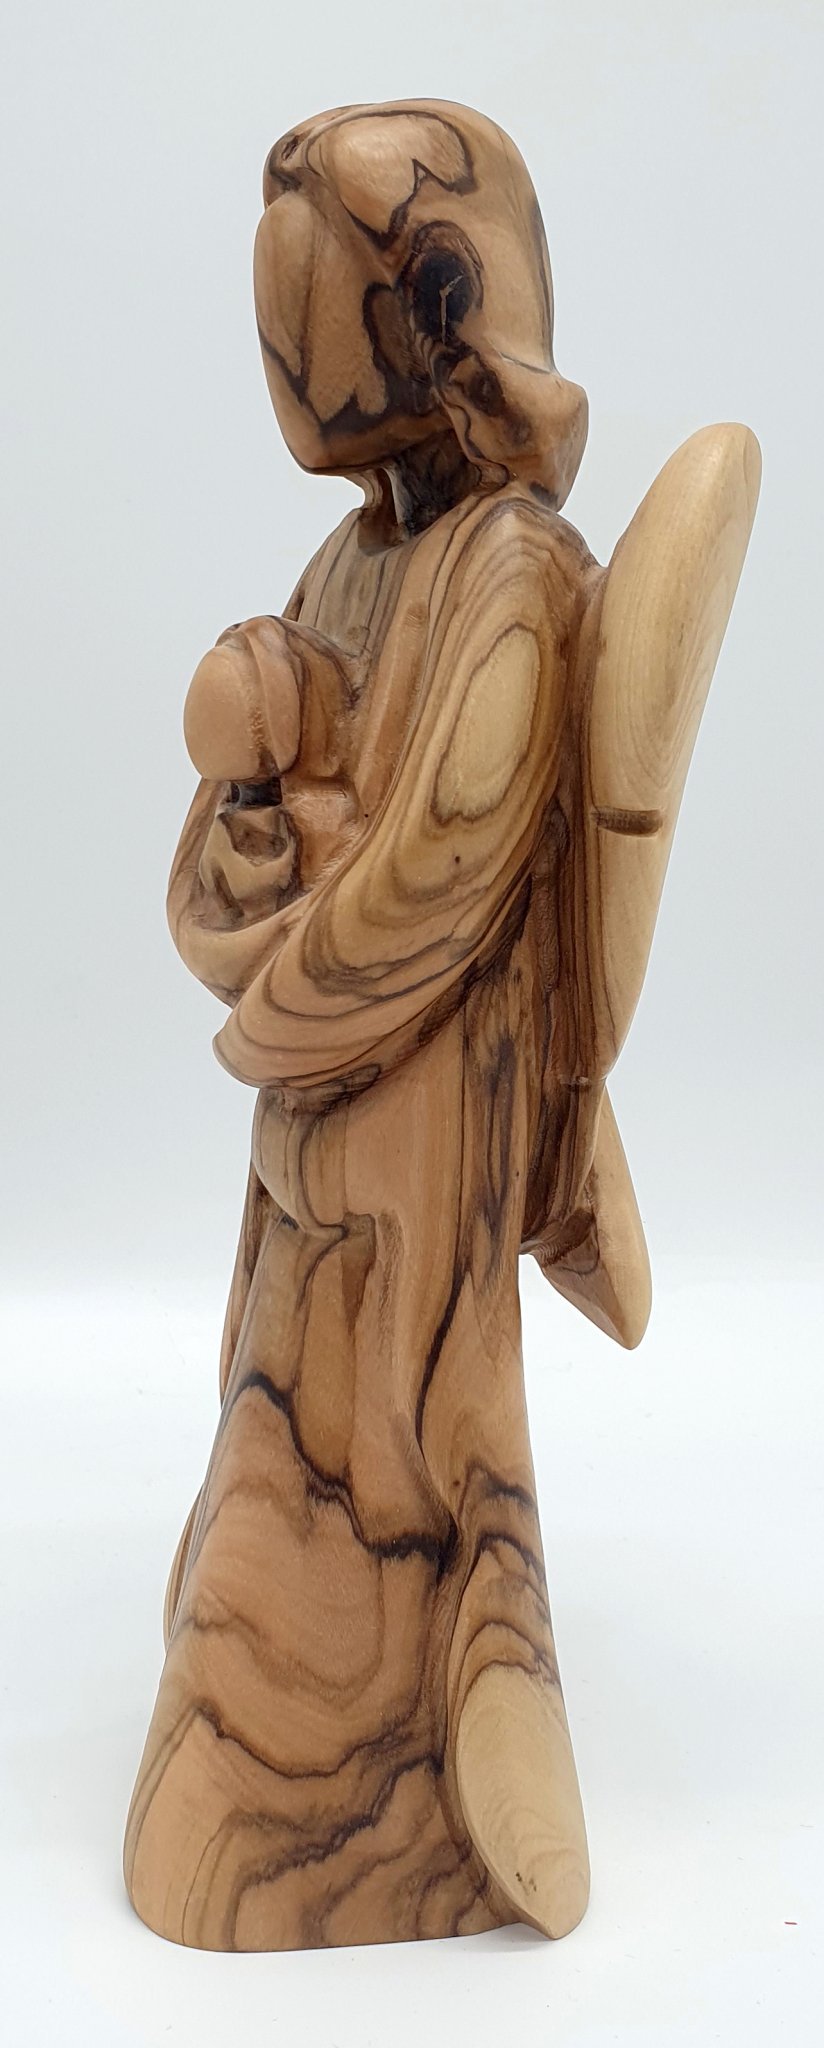 Zuluf Olive Wood Angel Figurine, Shepherds Field Religious Decor, Handcrafted Wooden Guardian Angel, Home Blessings Gift - Zuluf